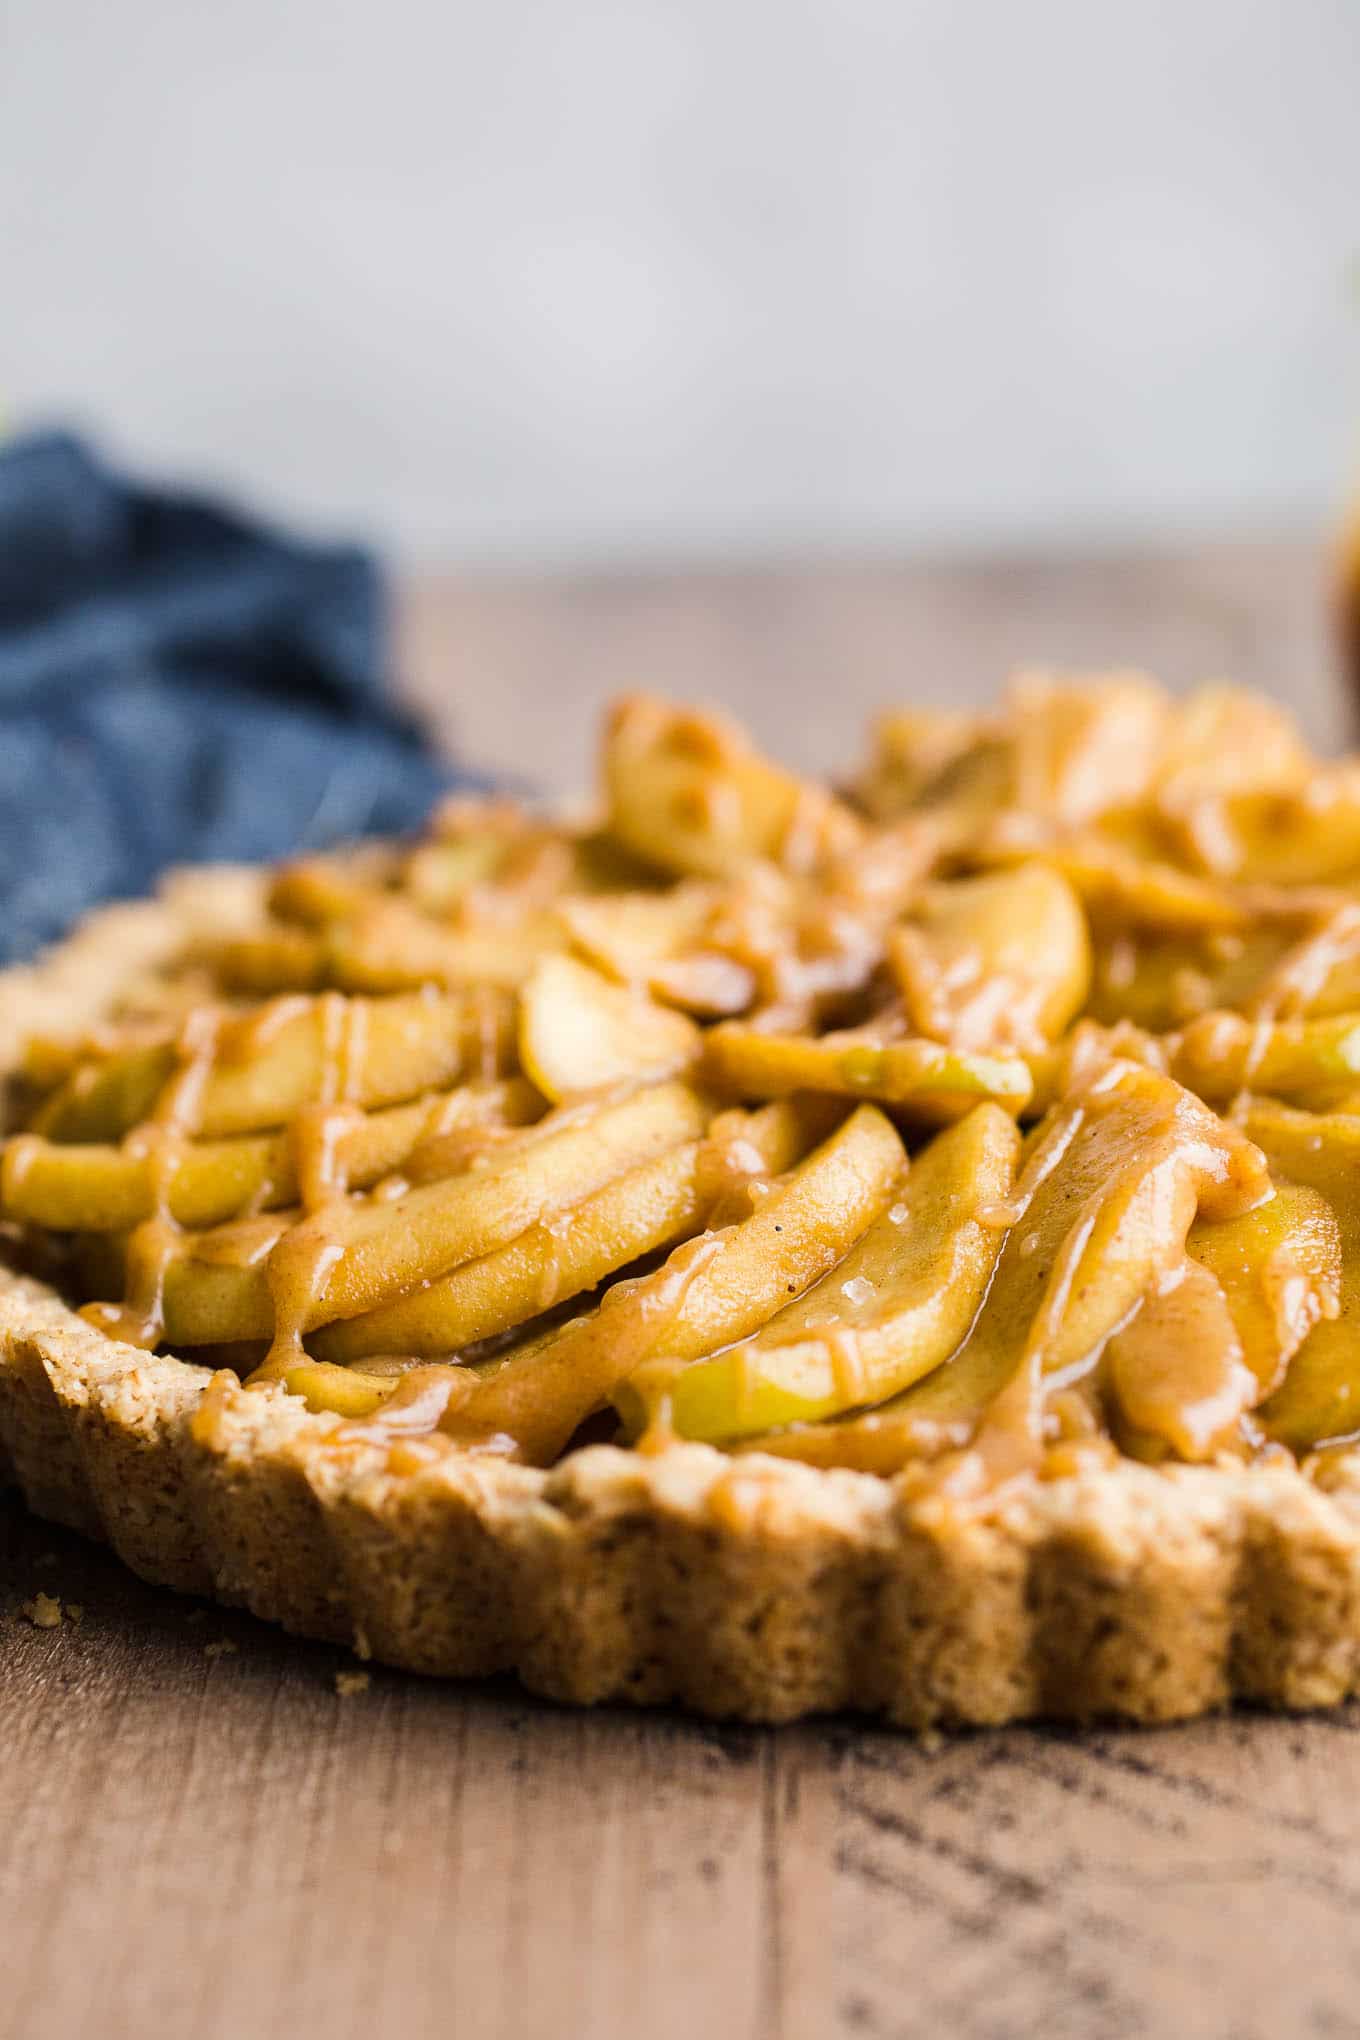 Gluten-Free Apple Tart with Oatmeal Cookie Crust is an easy dessert recipe made with an oat flour crust, a layer of date caramel, and topped with cinnamon apples. Prepare the crust and date caramel ahead of time for easier assembly. Vegan